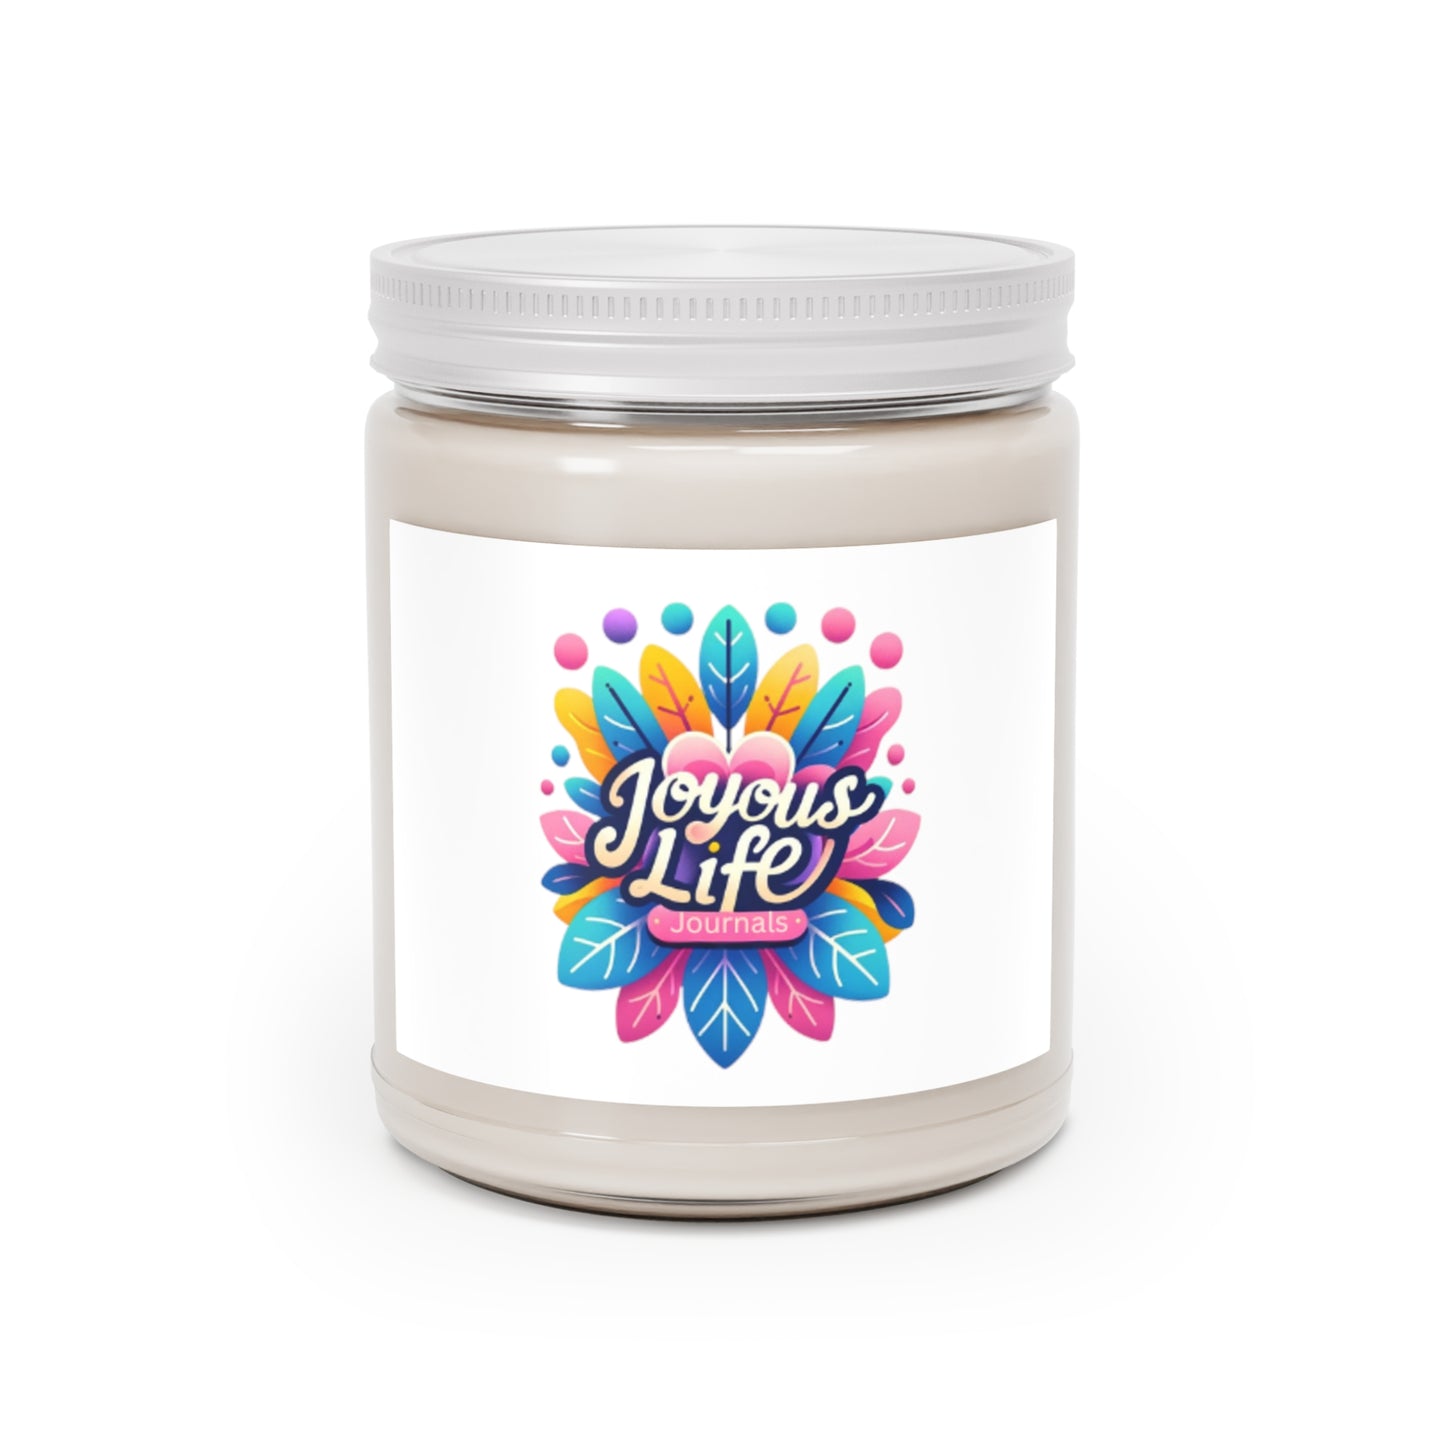 Whispering Blooms: Scented Candle & Joyous Life Journals